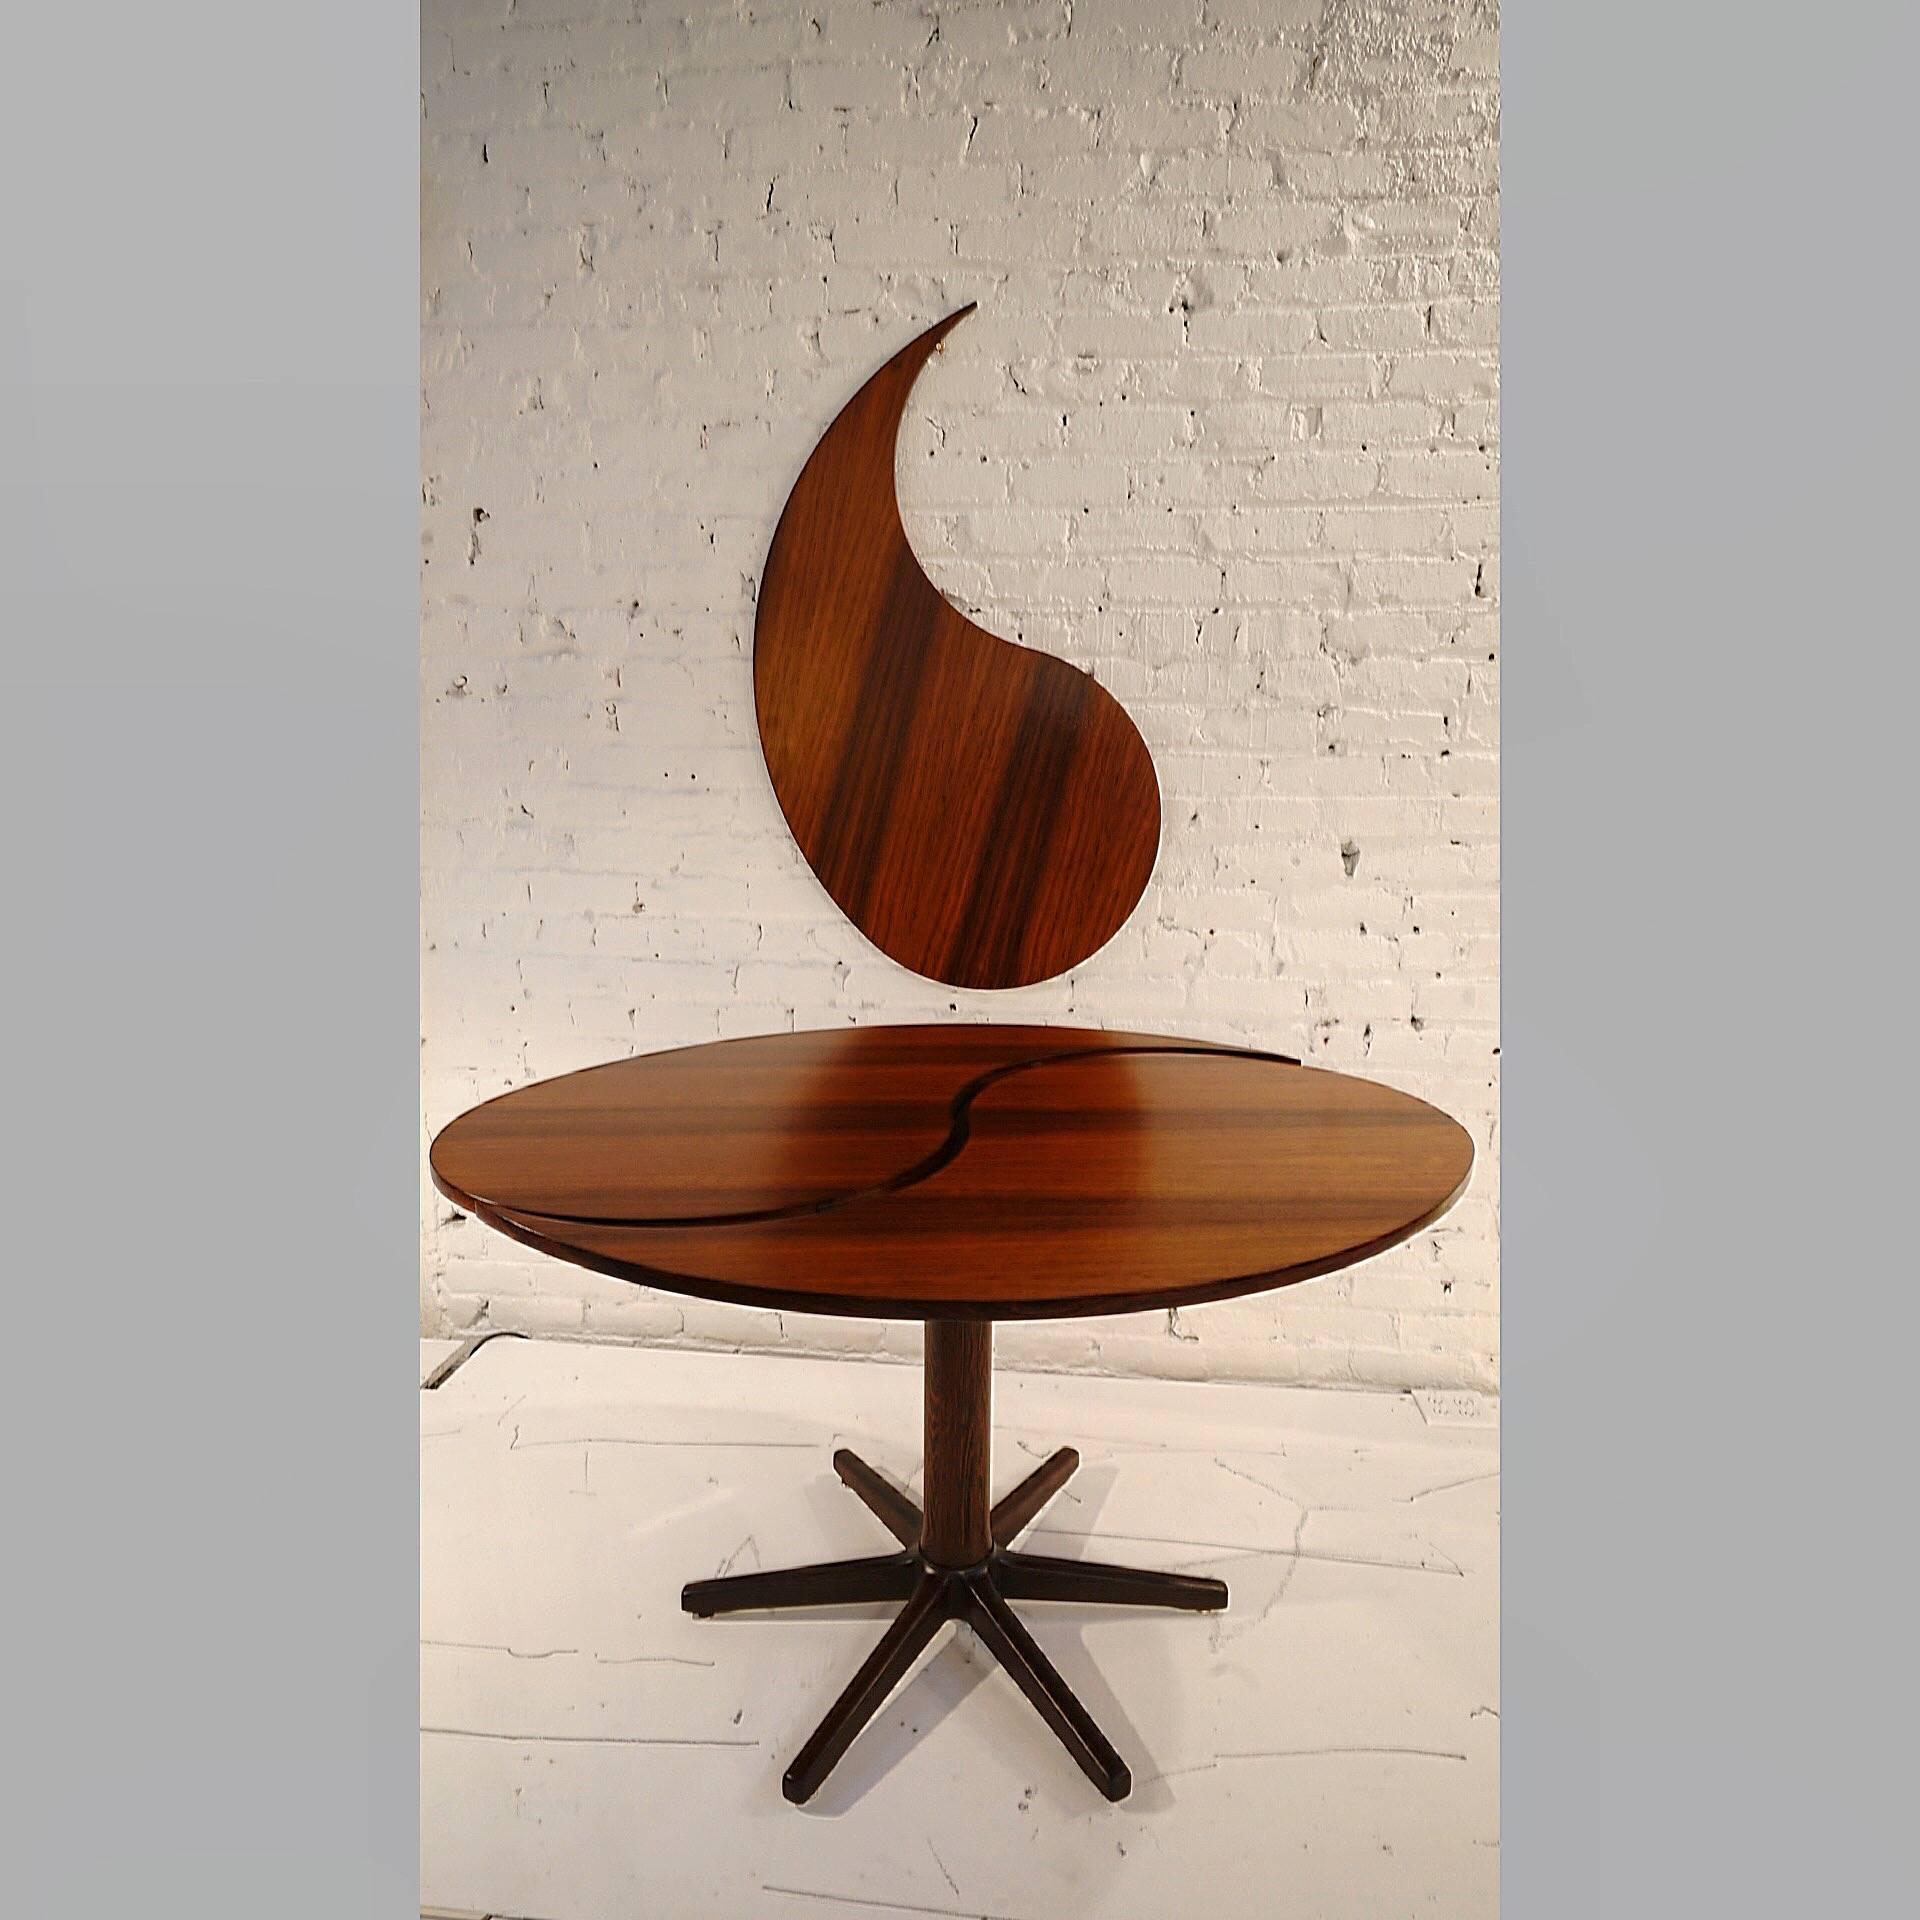 Designed by Ole Gjerløv-Knudsen - Produced by France & Son - Model FF550 - Year of design 1963 ... Unique table with spin-out top which allows for the insertion of a third leaf, making the table circular.
A black formica triangle fits the center